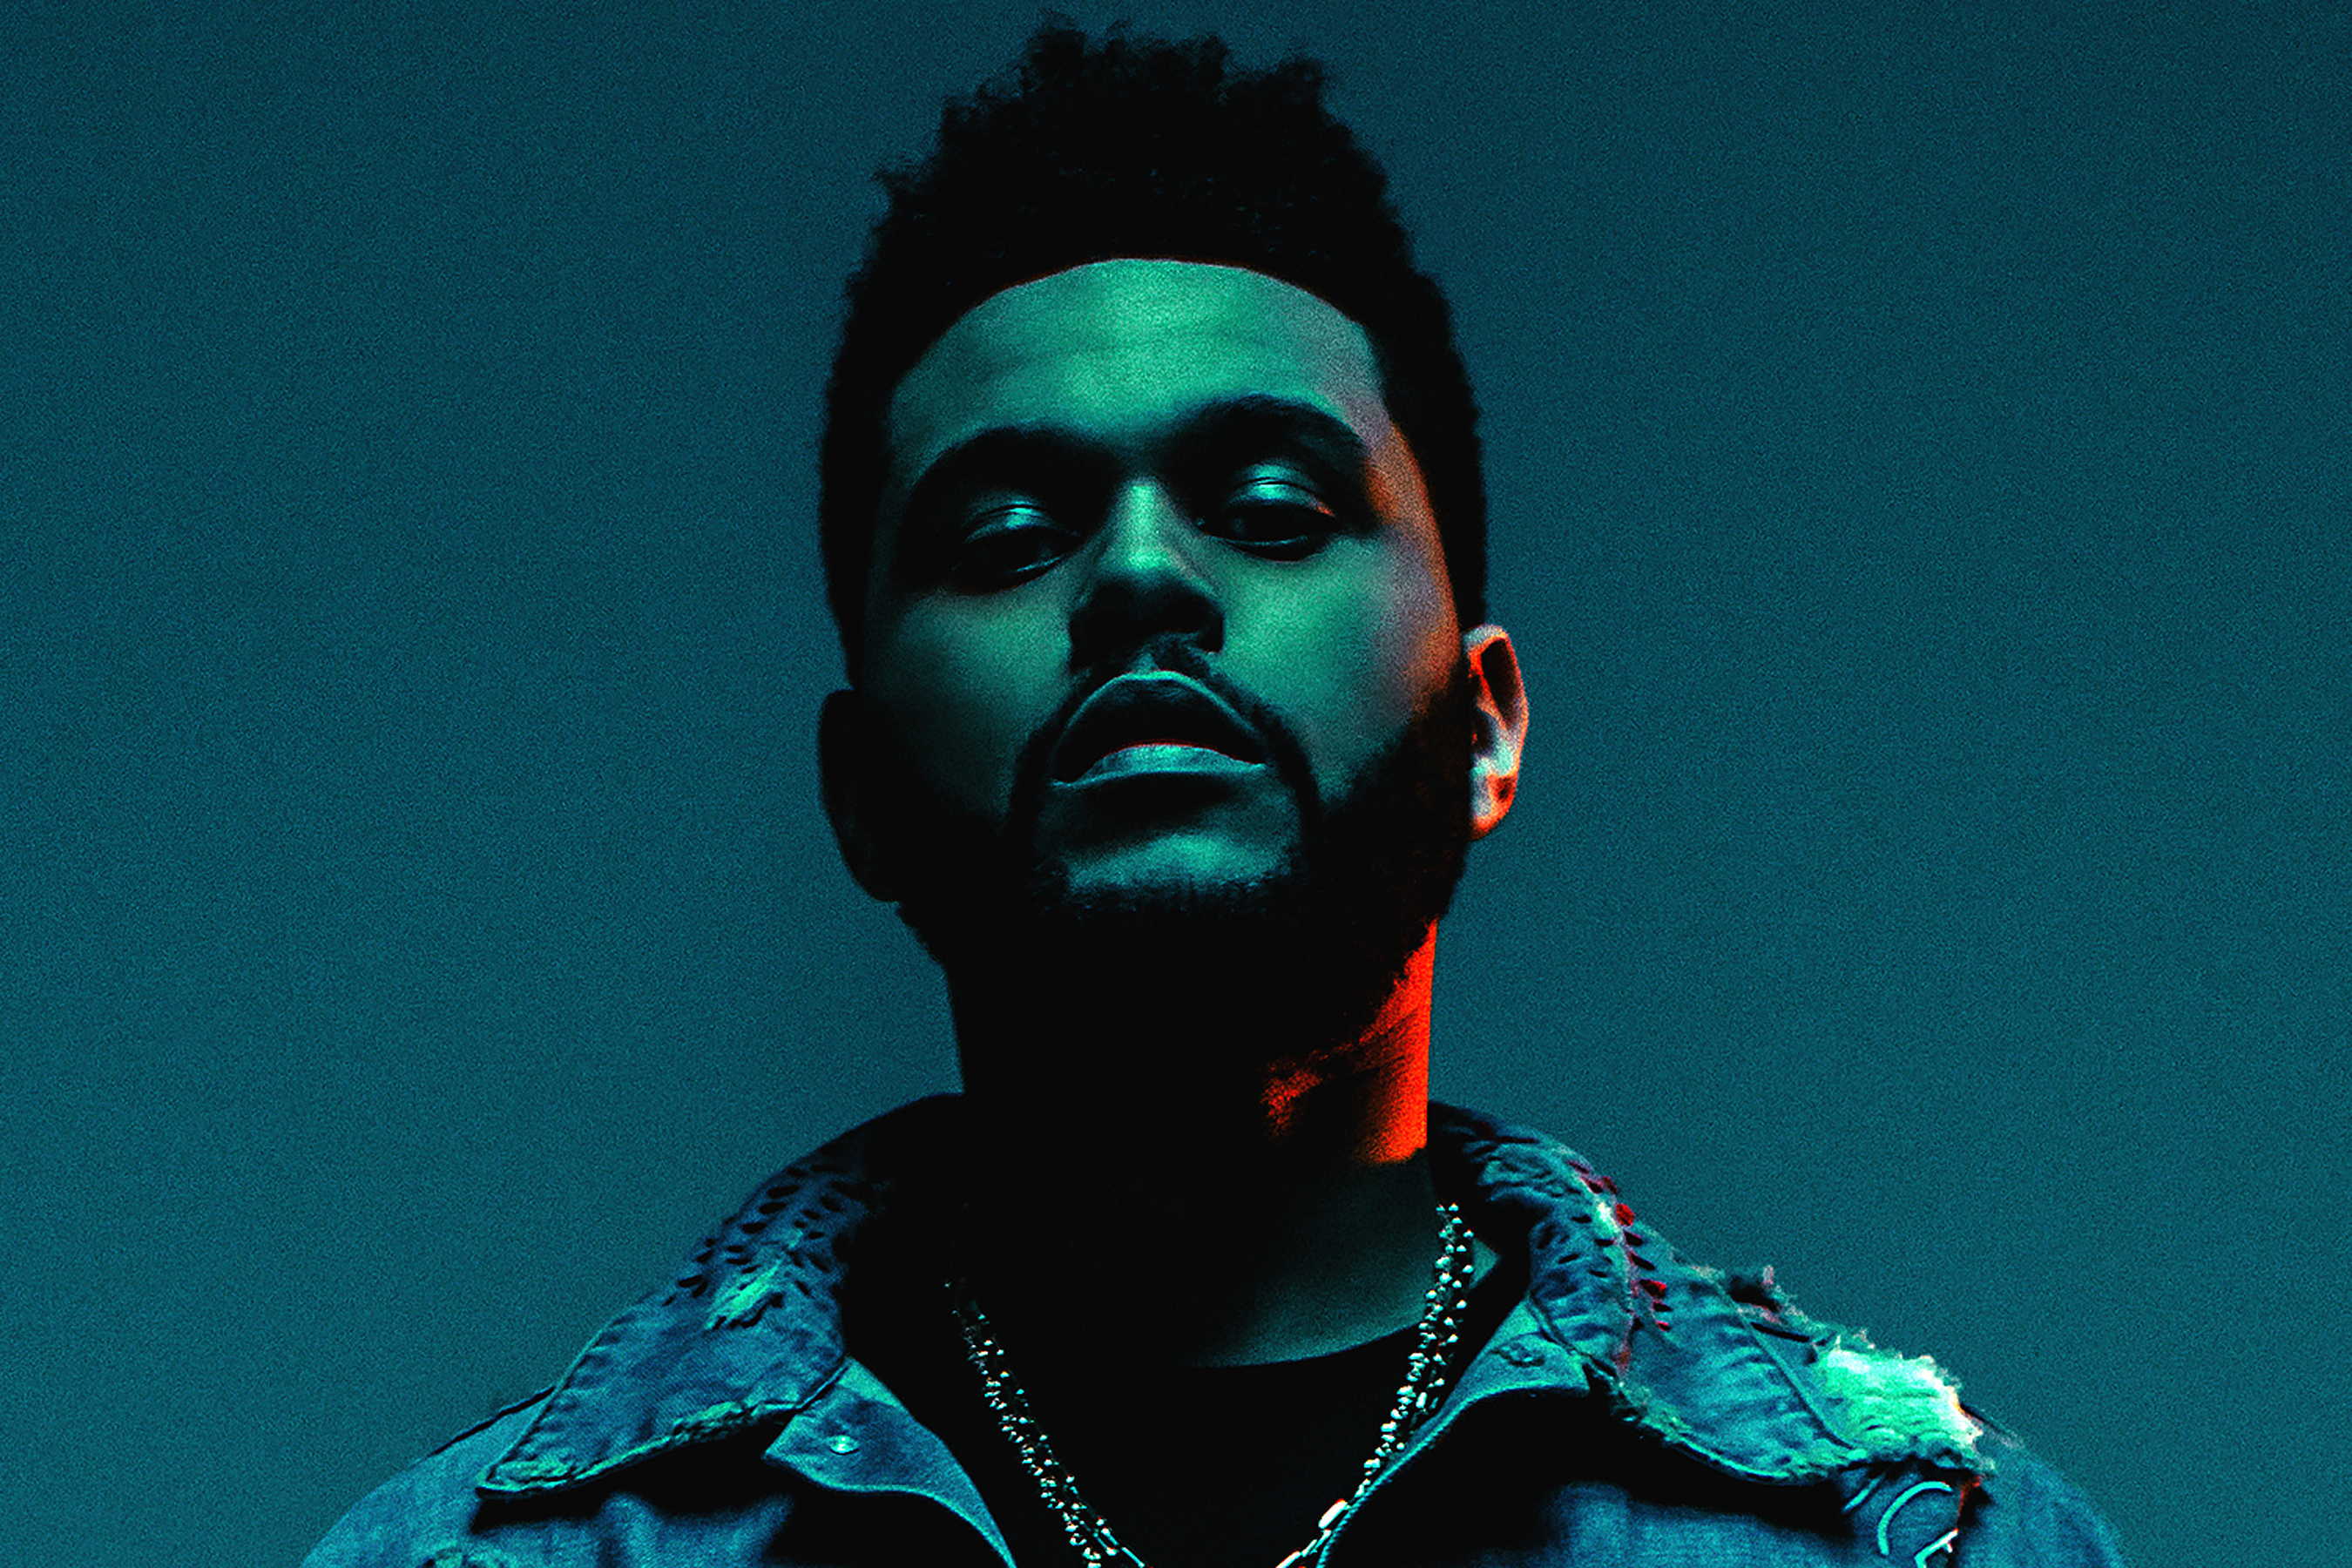 The weekend out my name. The Weeknd. Певец the Weeknd. Эйбел Макконен Тесфайе. Abel the Weeknd.